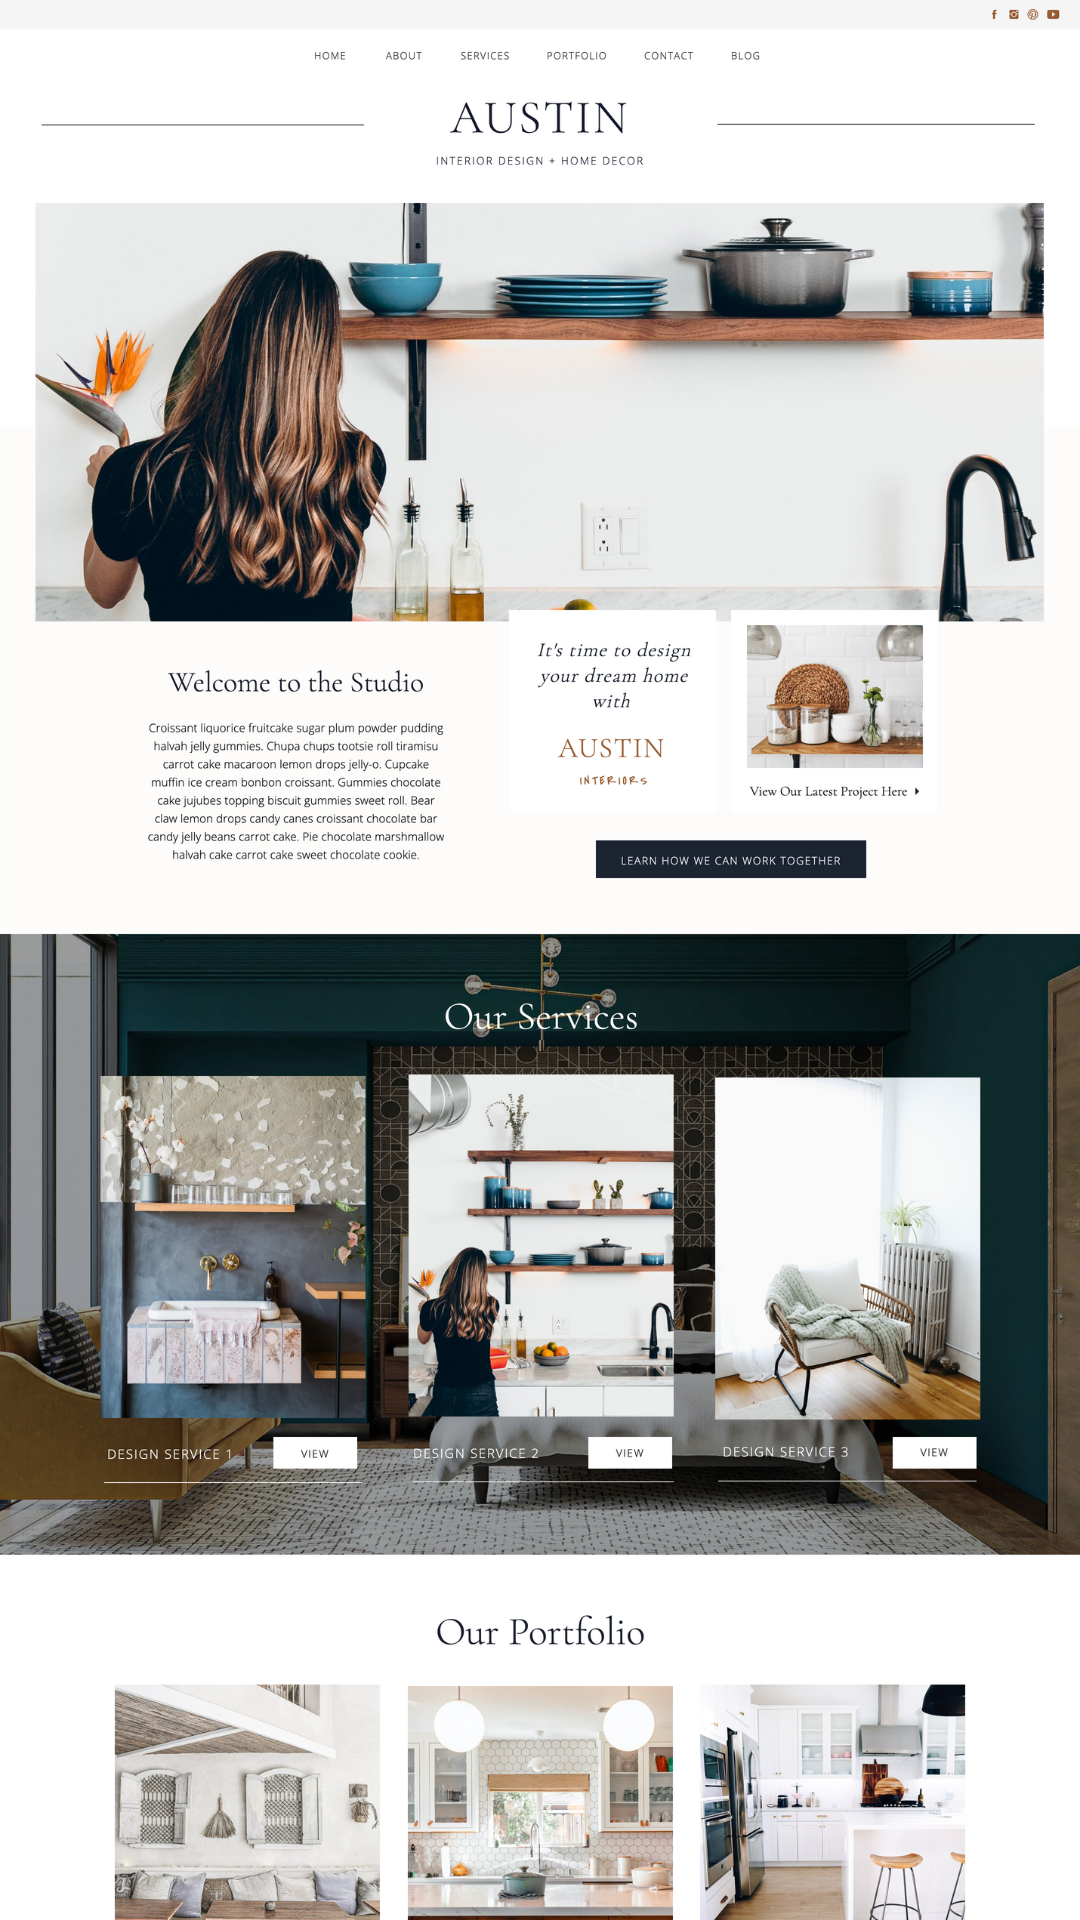 website design for interior designers, small business owners, social media managers